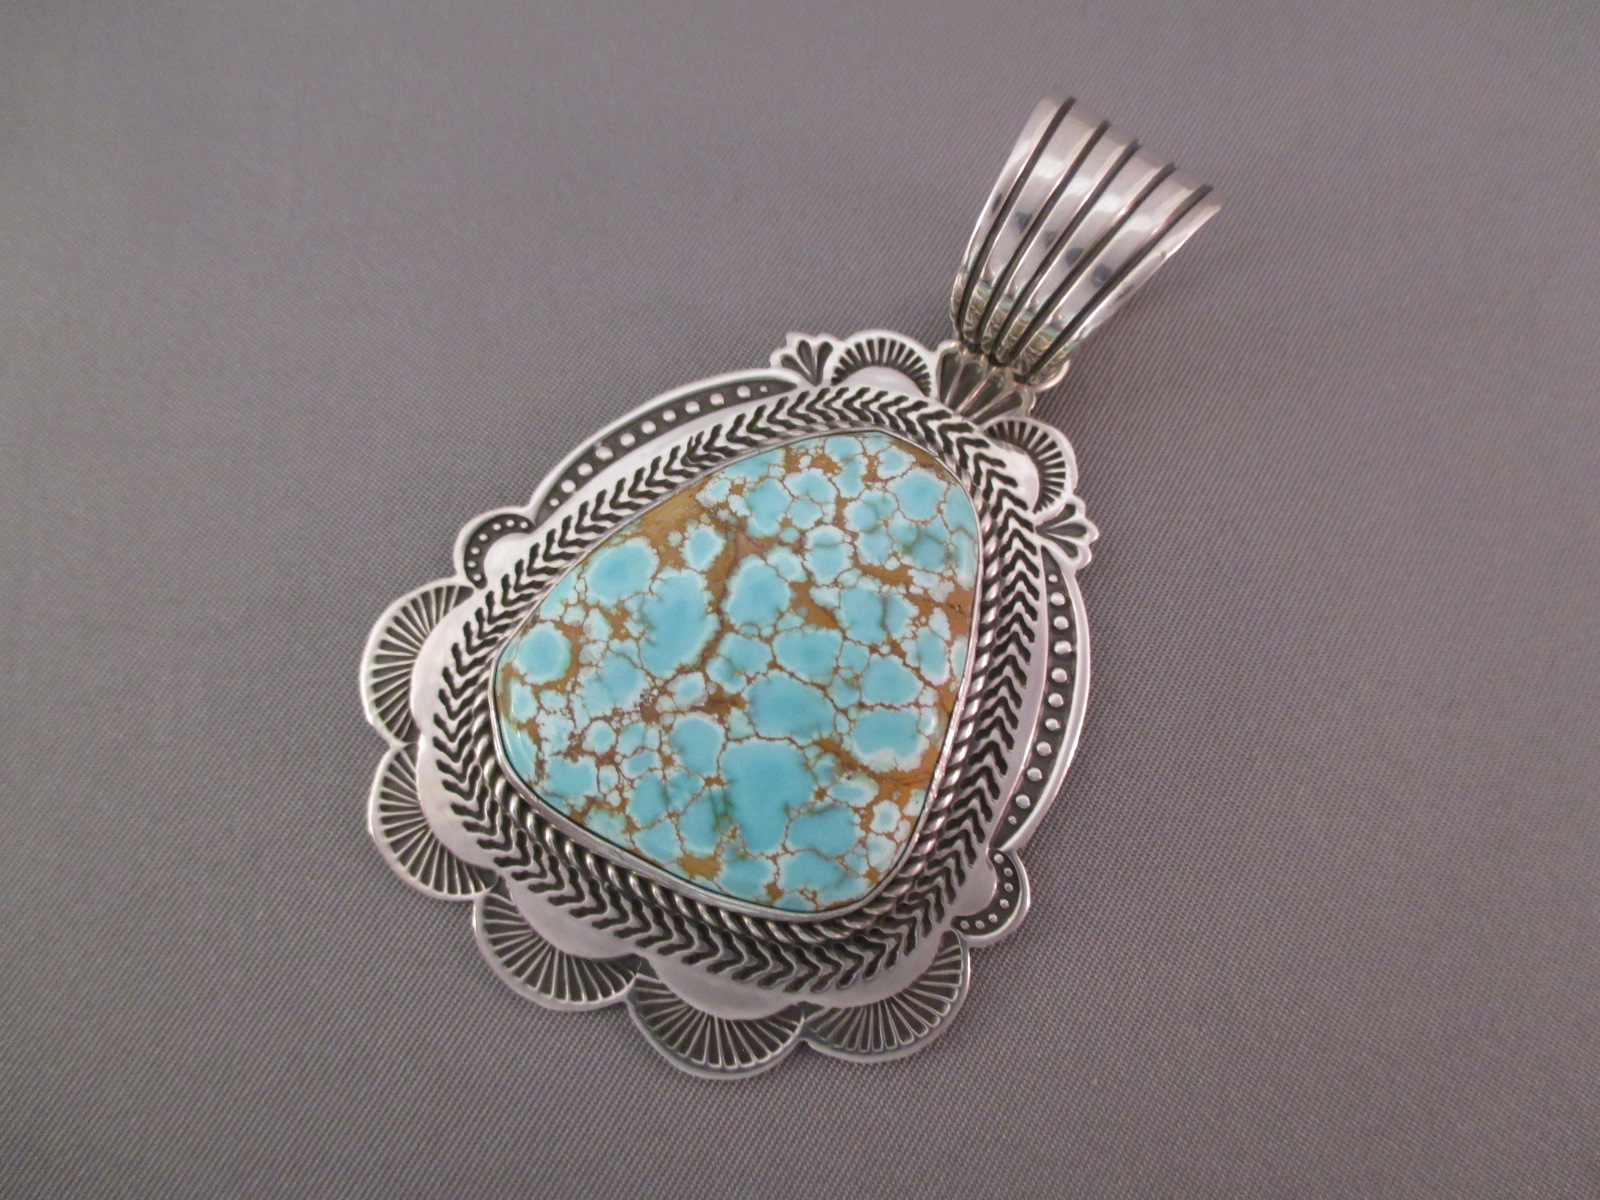 Turquoise Jewelry - #8 Turquoise Pendant by Native American Indian jewelry artist, Albert Jake $545-